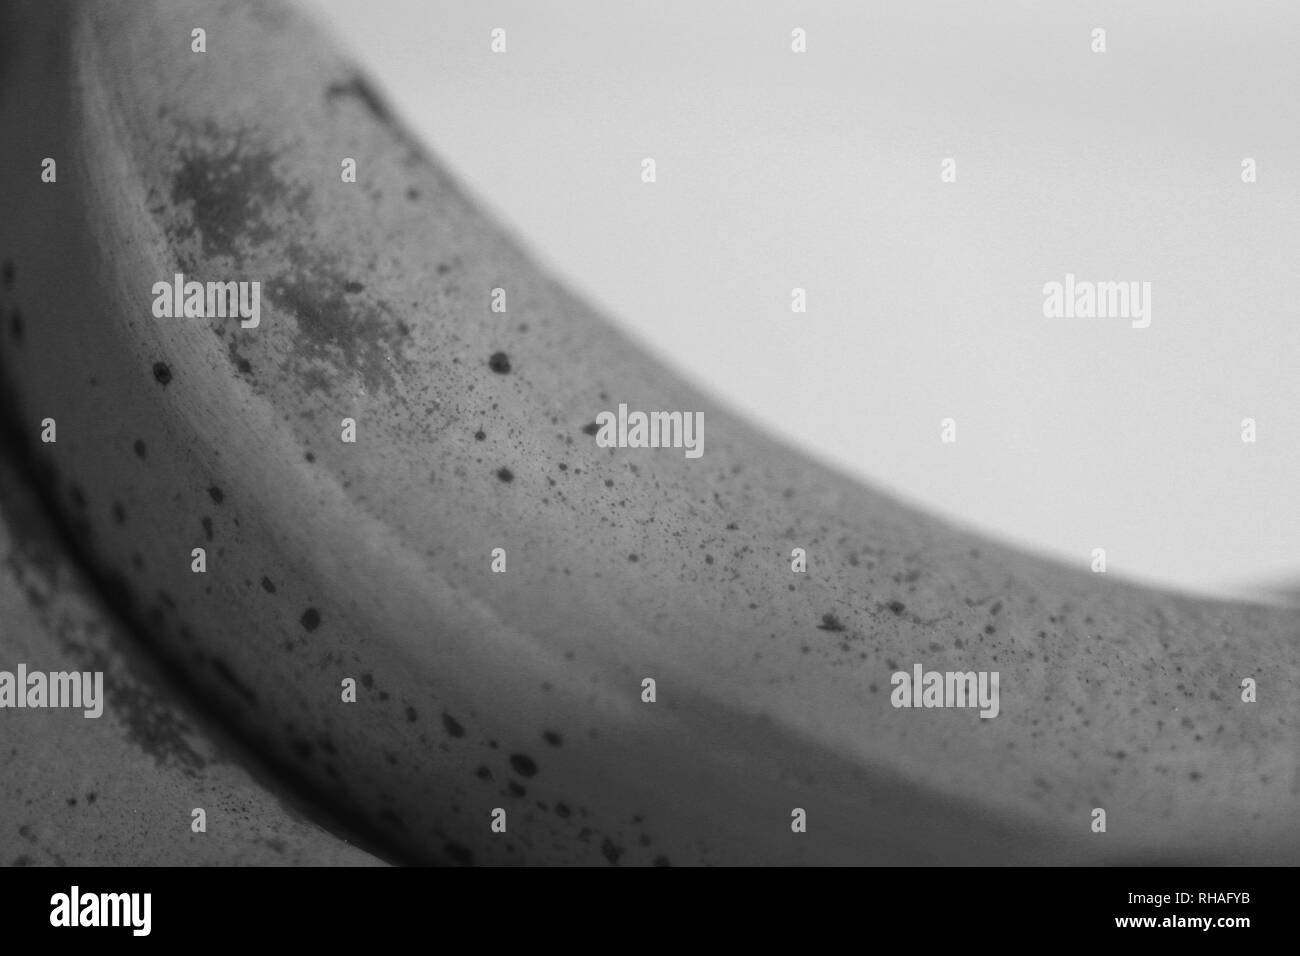 Closeup photo of bananas. Taken with macro objective to show all the smallest details. The bananas are very ripe. Beautiful black & white image. Stock Photo